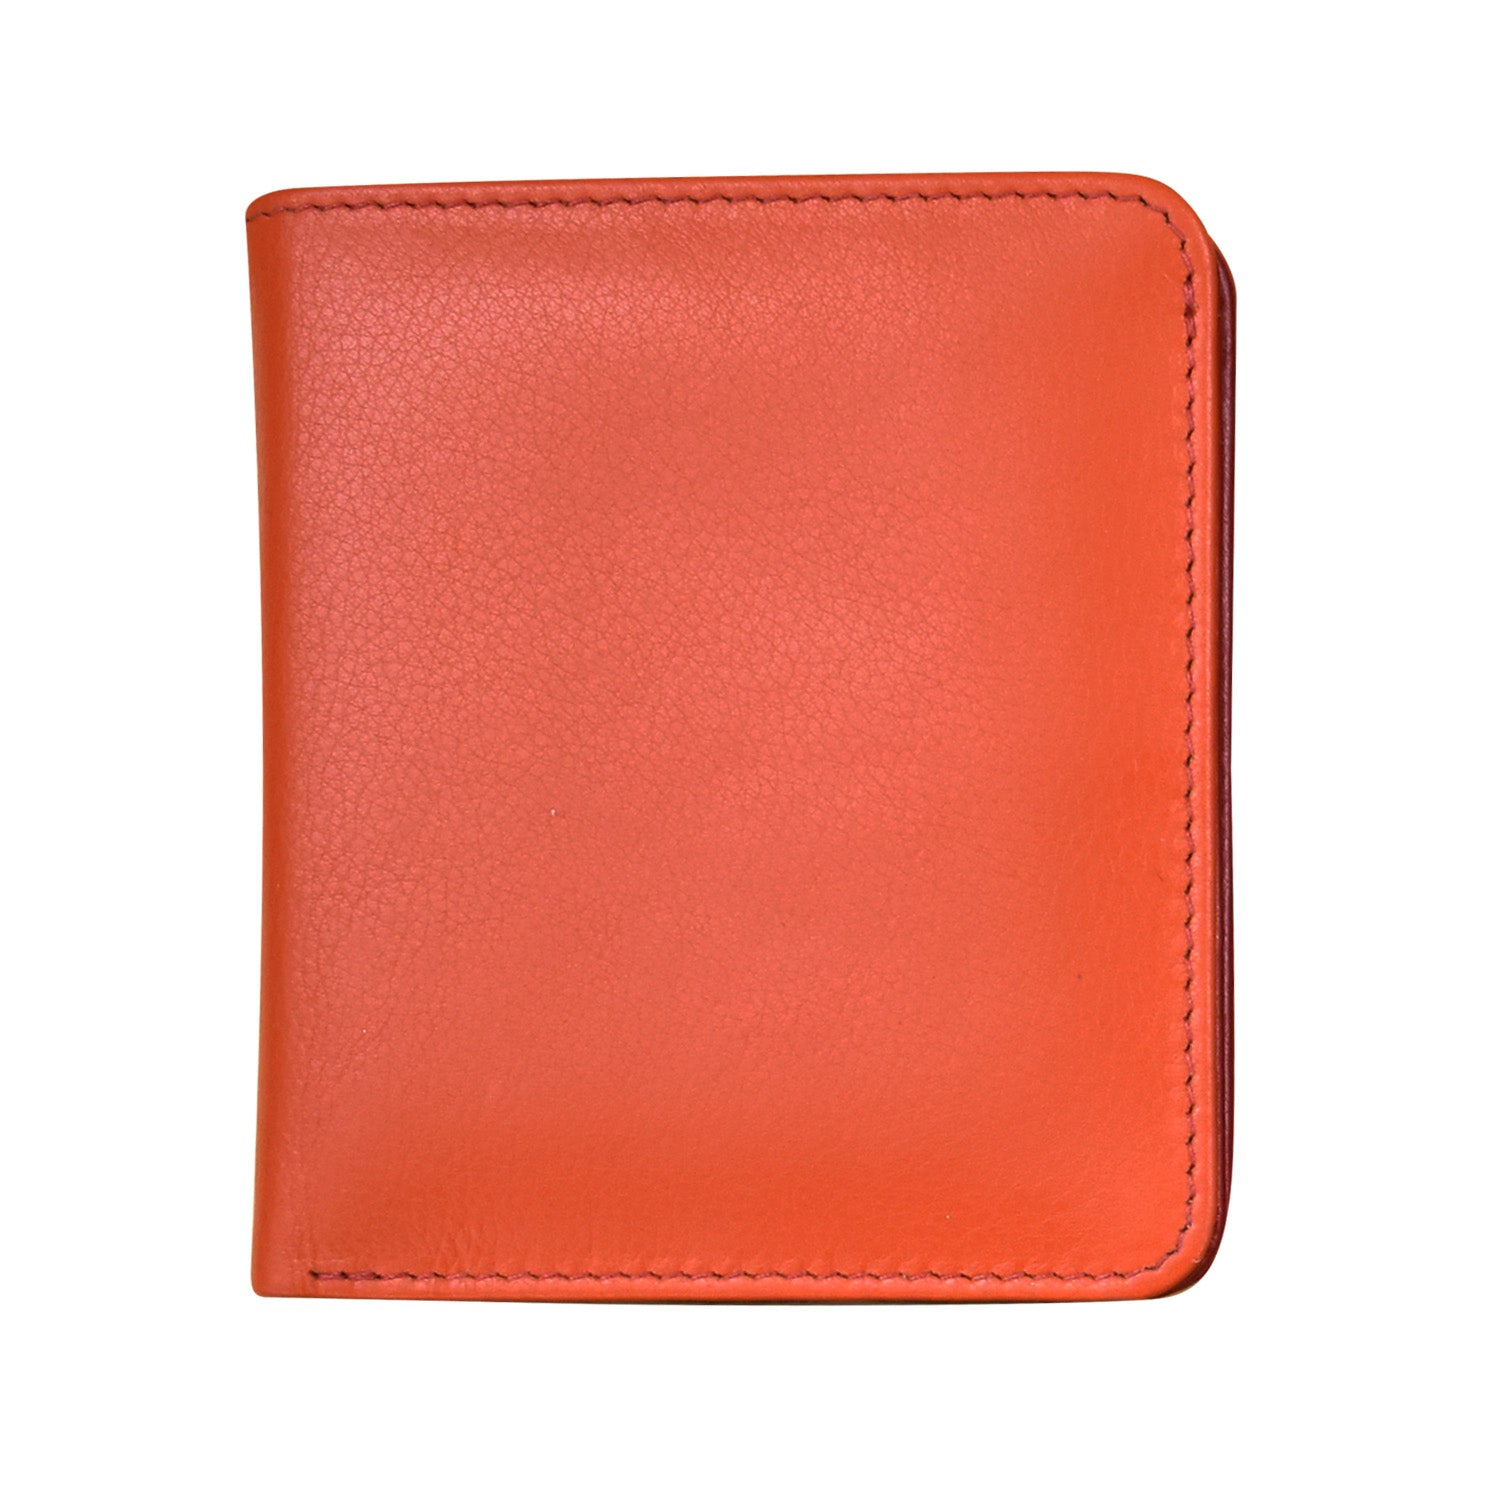 Two-toned leather bifold wallet